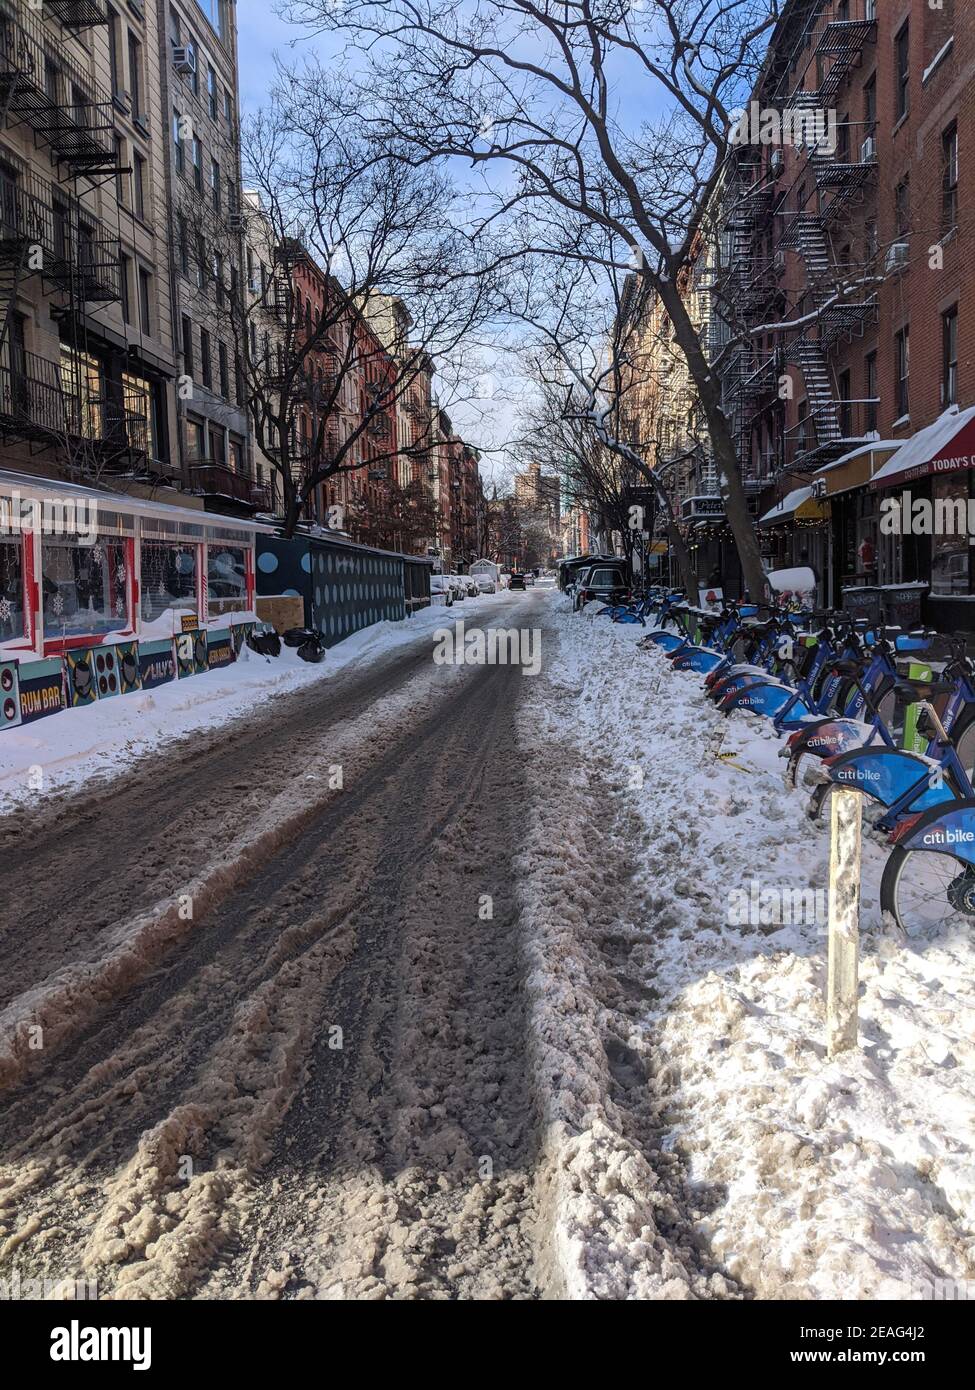 New York, USA - December 12: East Village street in Manhattan covered with pile of snow. Empty winter road with melting snow Stock Photo